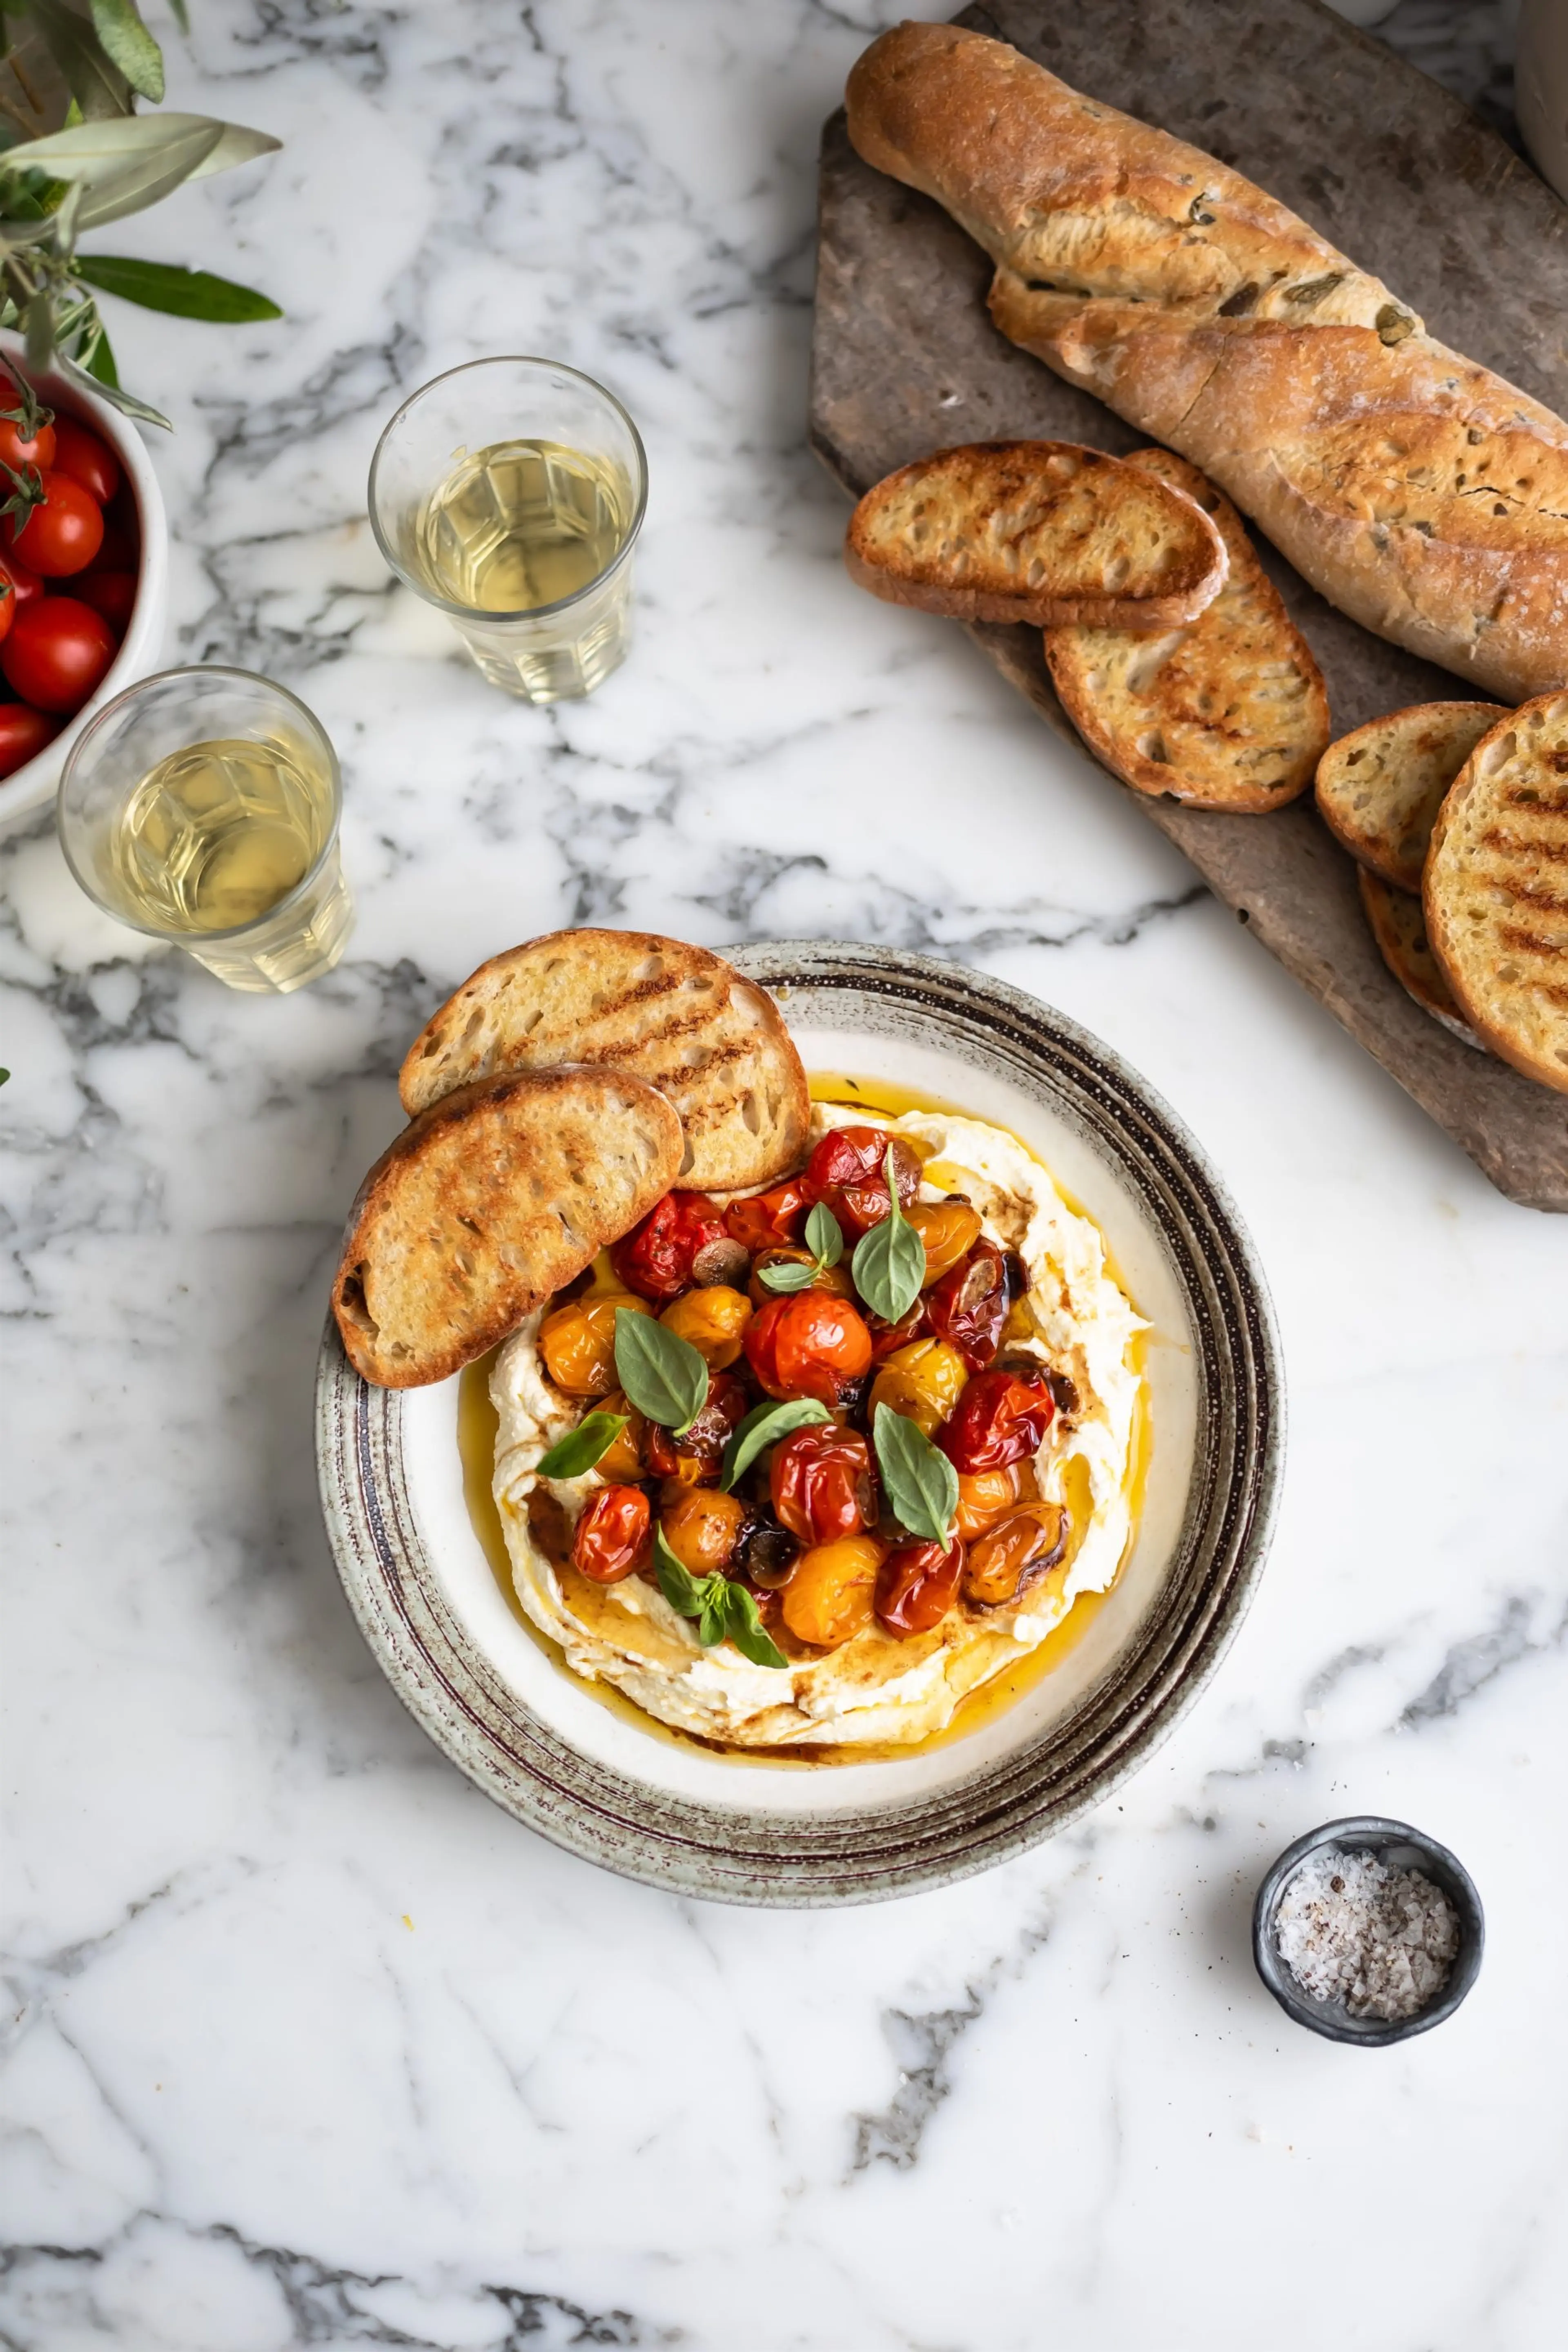 Whipped feta with roasted tomatoes and garlic